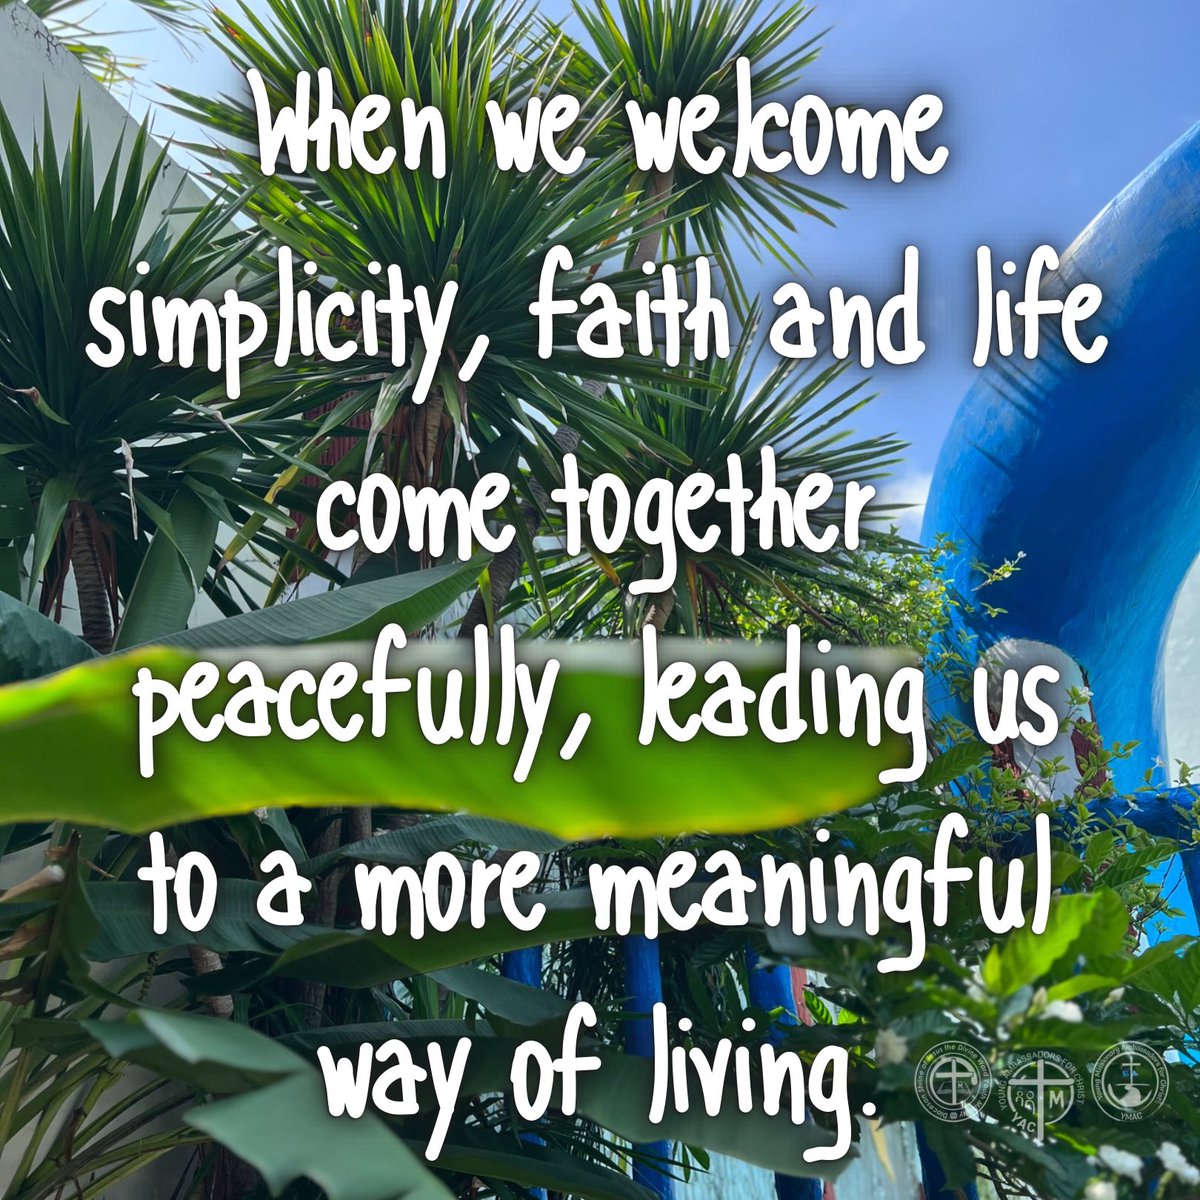 When we welcome simplicity, faith and life come together peacefully, leading us to a more meaningful way of living.

#EmbraceSimplicity #FaithInSimplicity #FindingMeaning #DivineHarmony #SimpleChoices #JourneyOfFaith #LifeInHarmony #SimplicityMatters #YAC #YMAC #SYM #SVDyouth